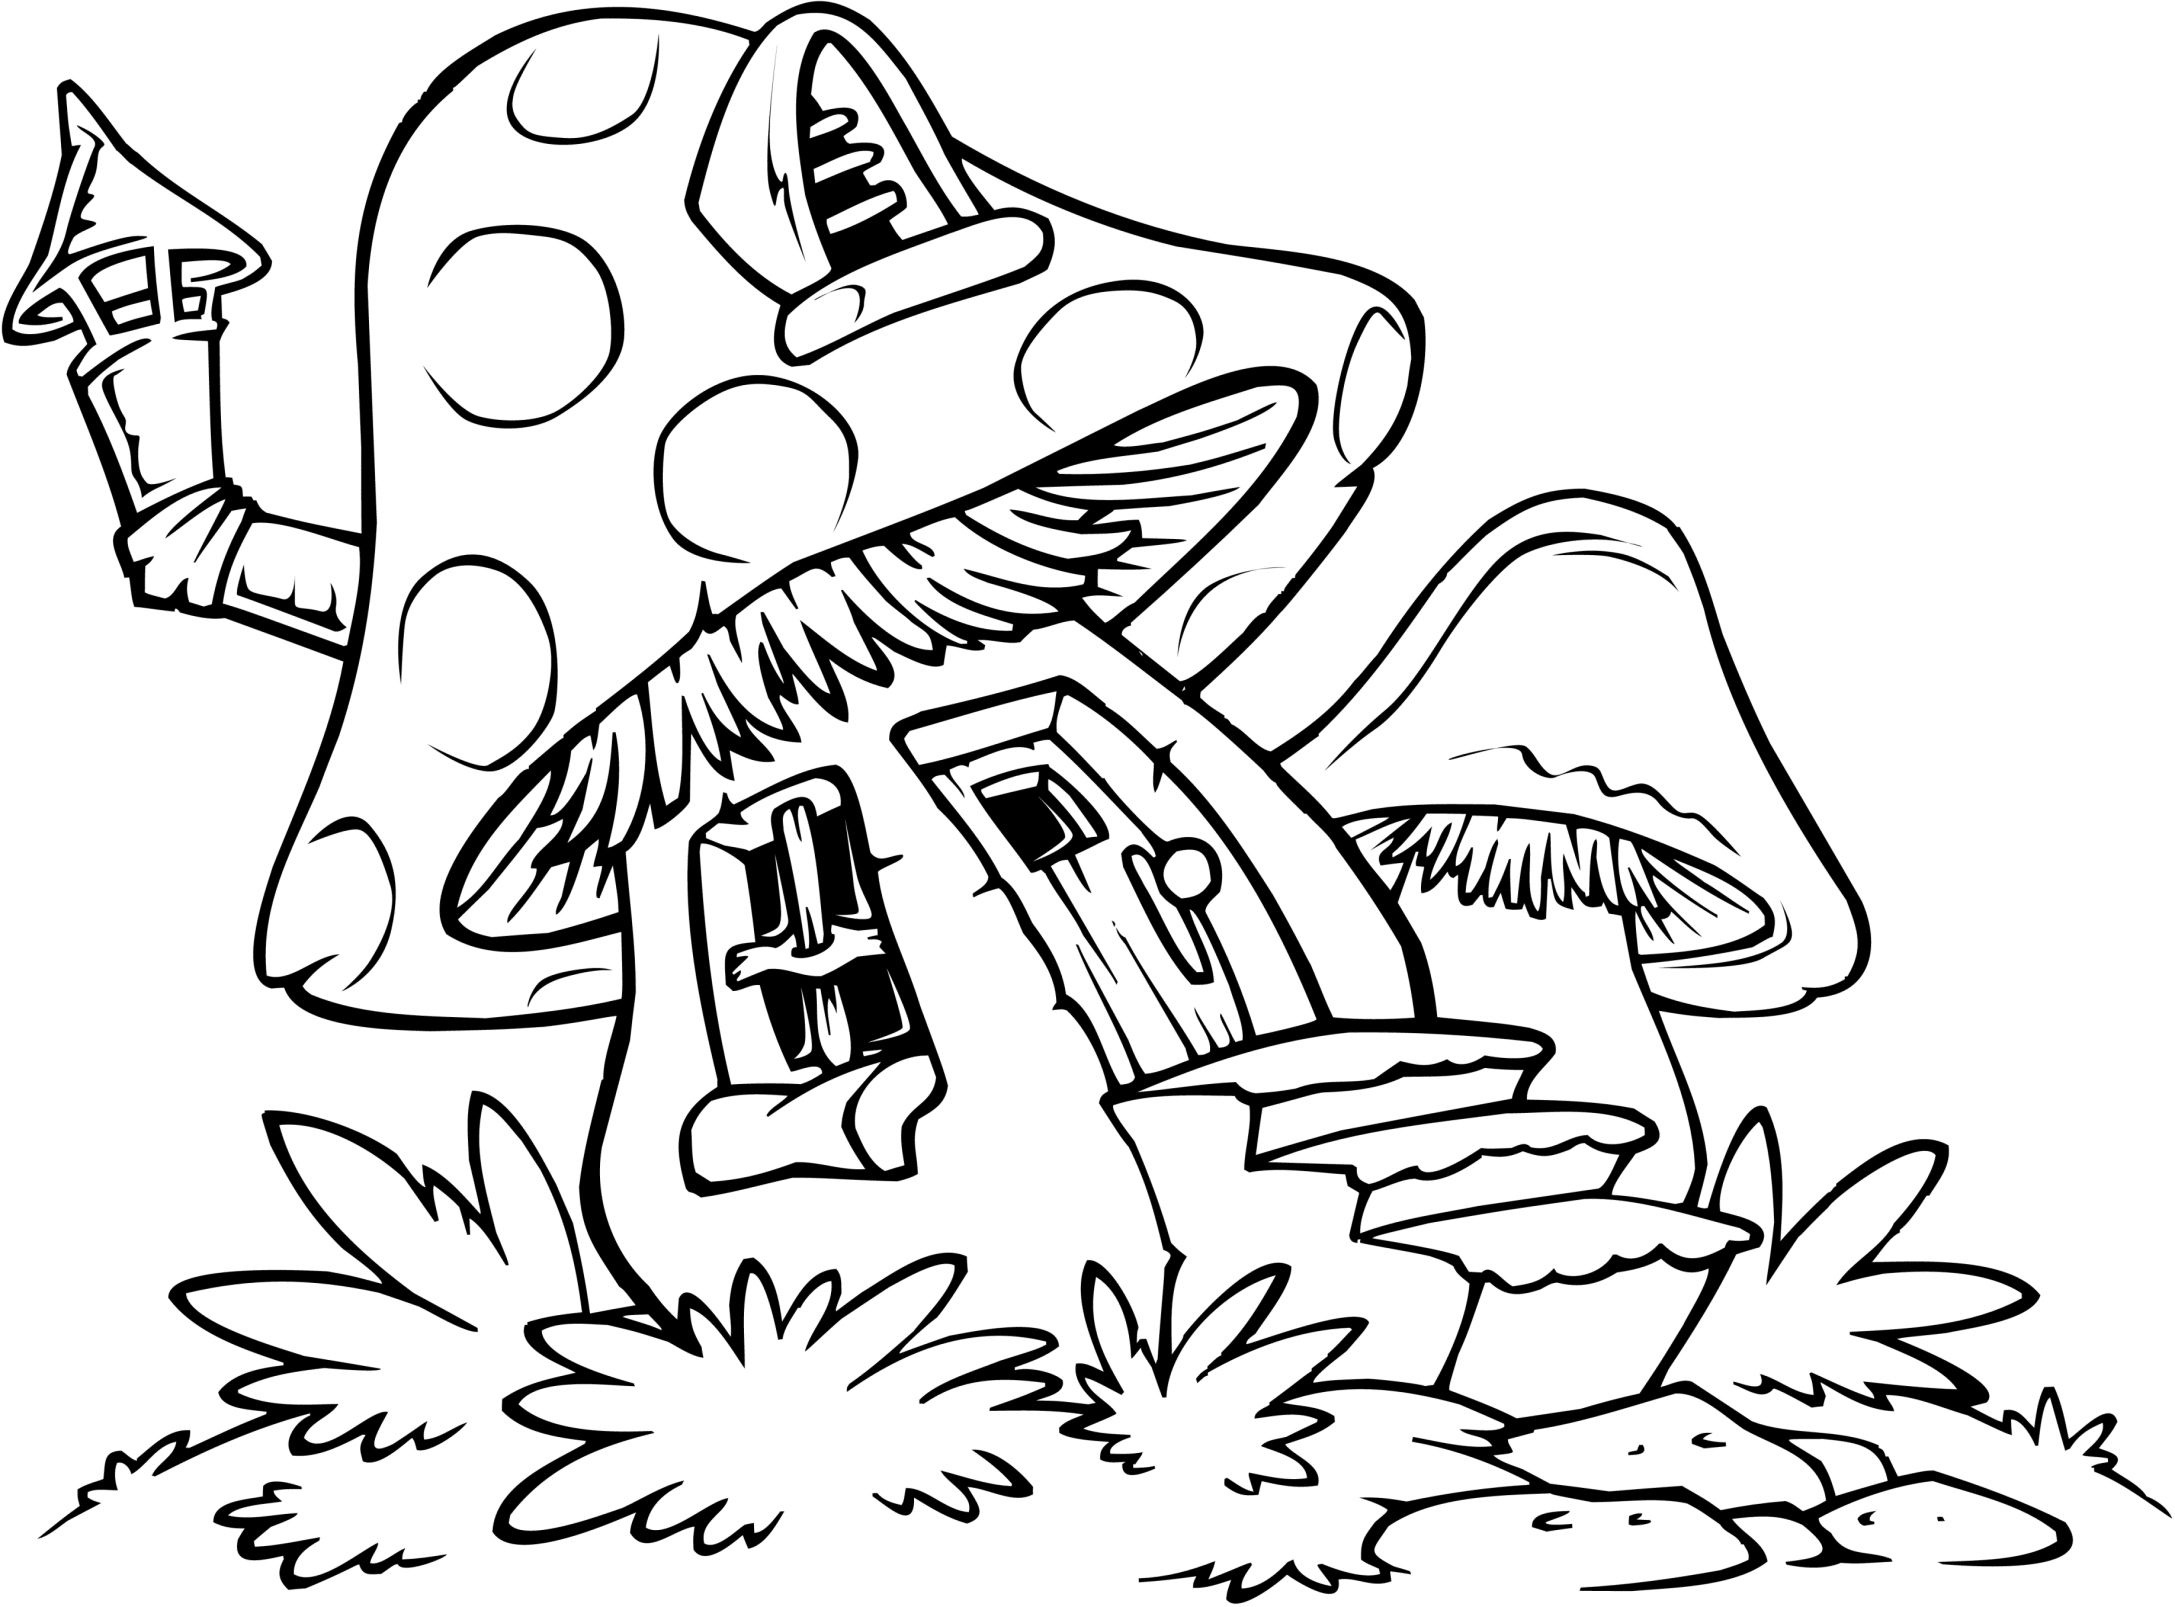 Mushroom House Coloring Pages | Coloring Pages | Easy Coloring Pages - Free Printable Mushroom Coloring Pages